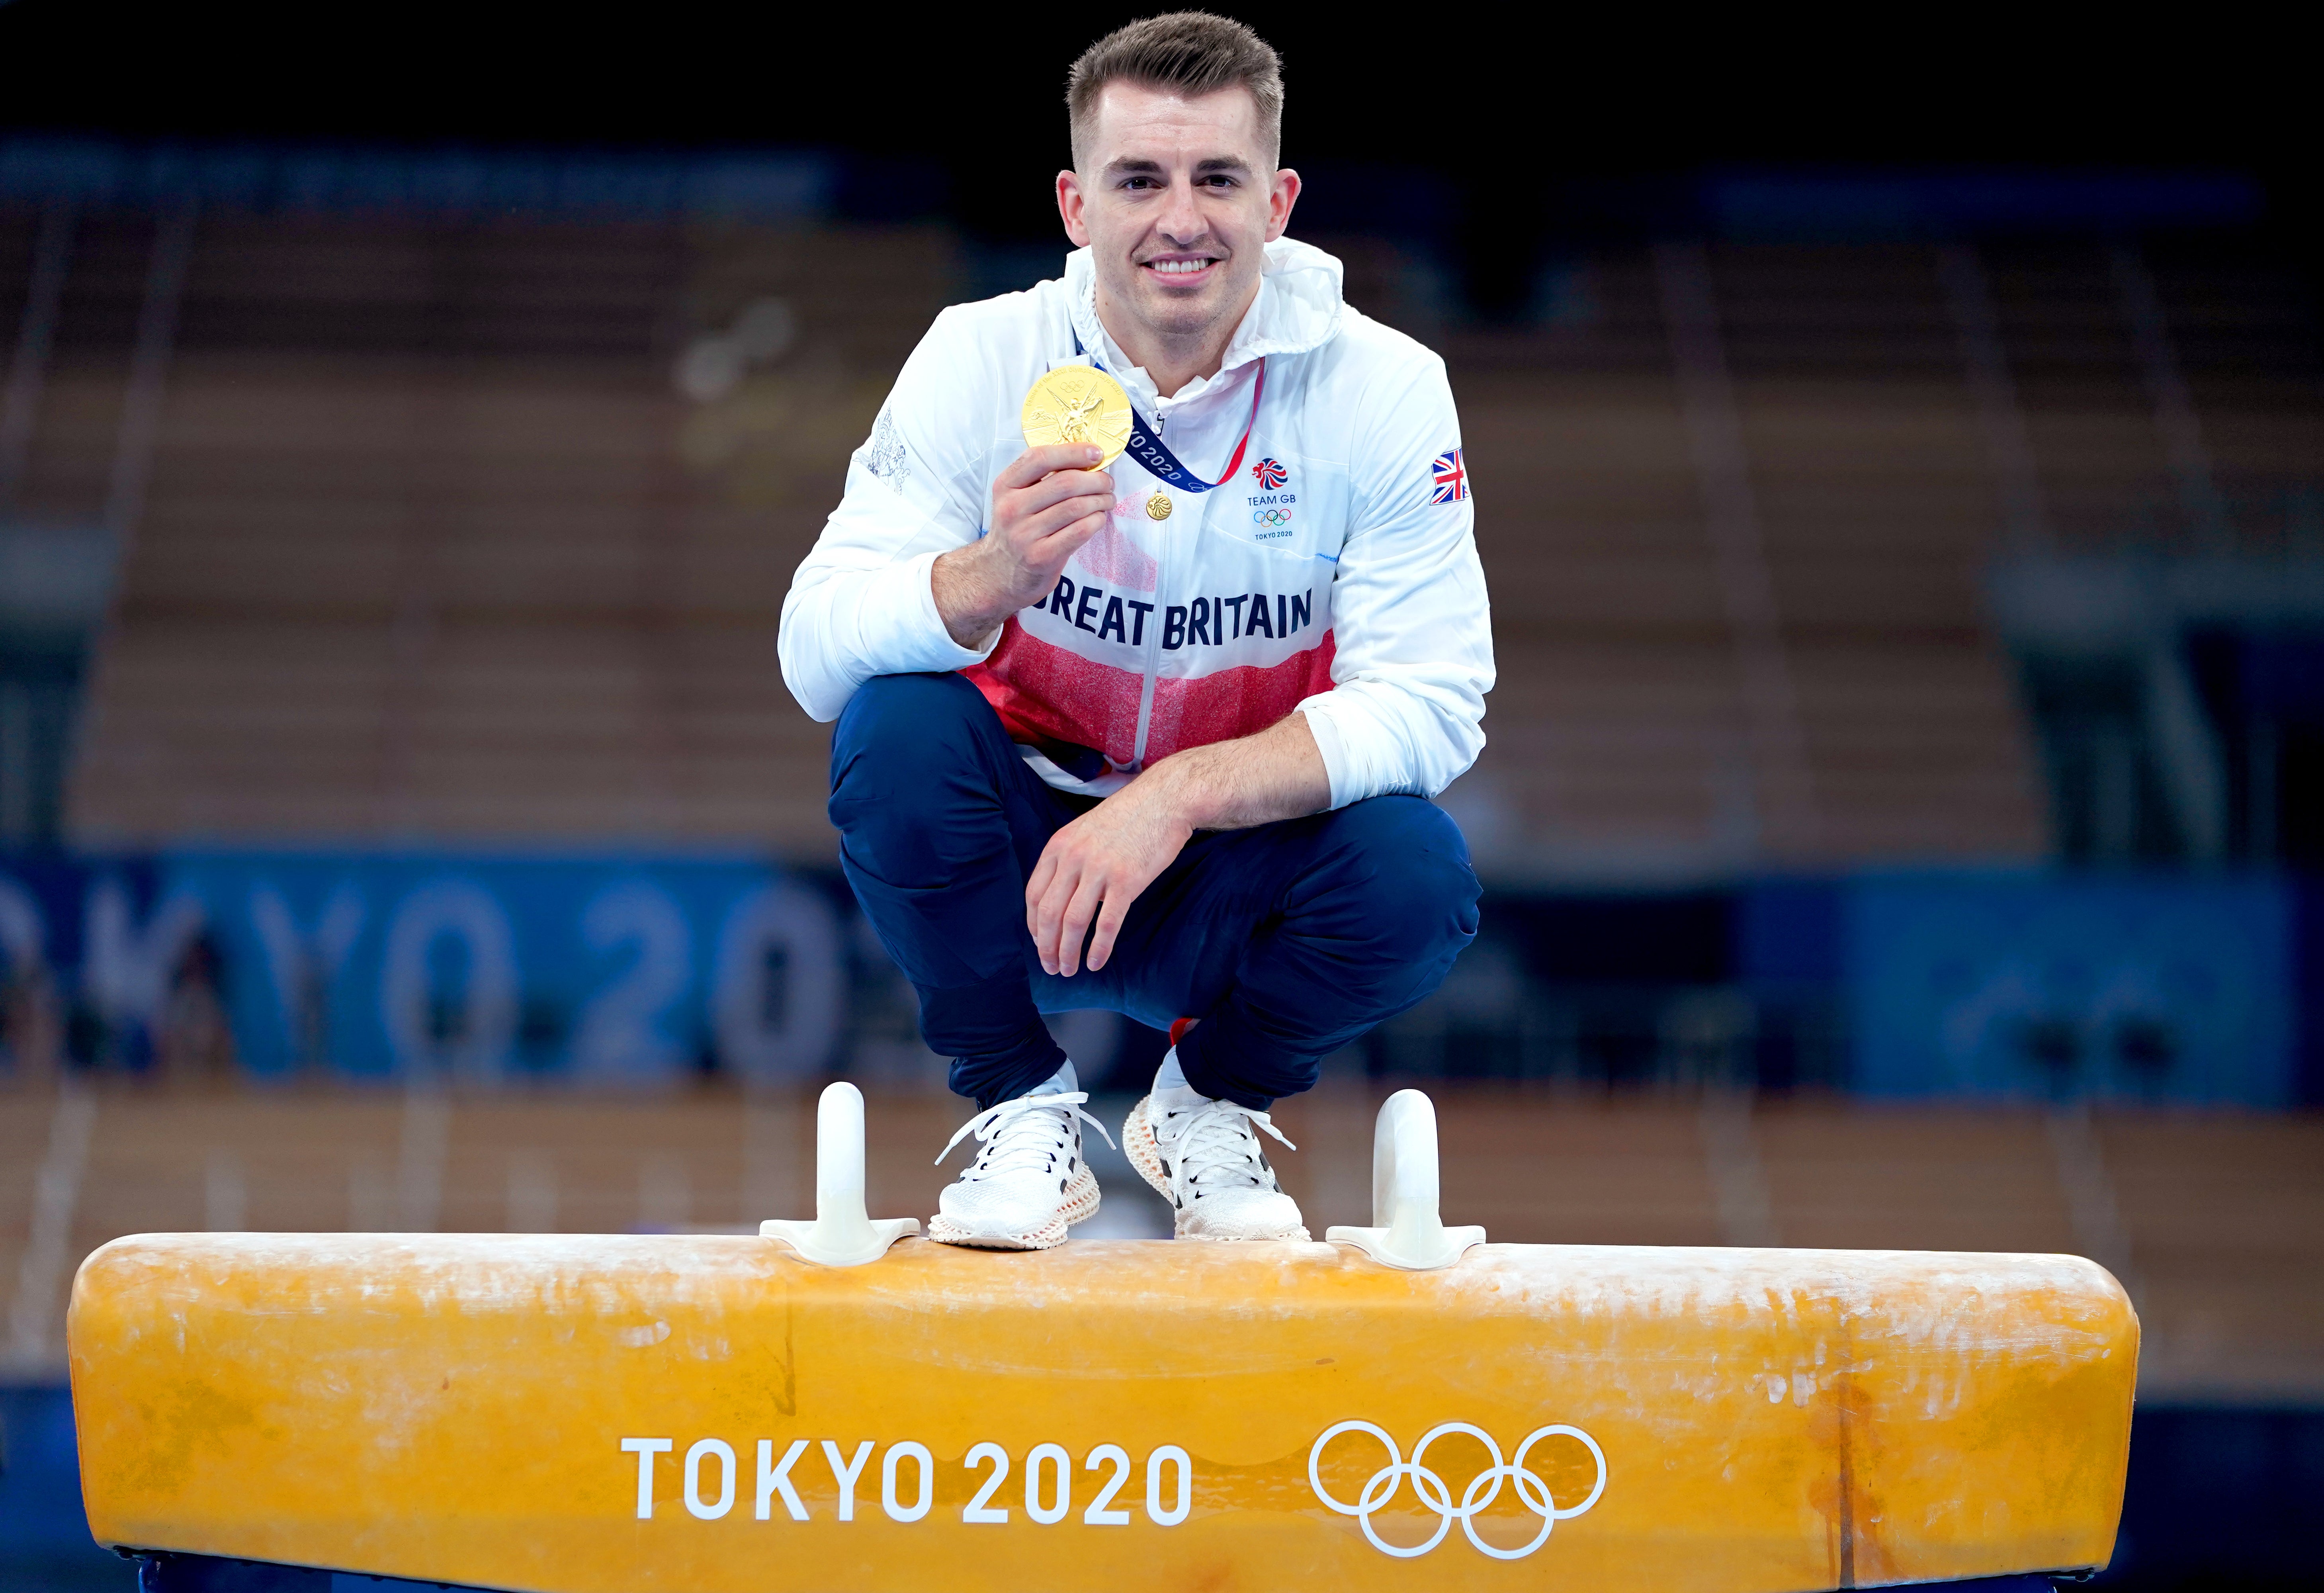 Max Whitlock successfully defended his Olympic title on the pommel horse in Tokyo (Mike Egerton/PA)